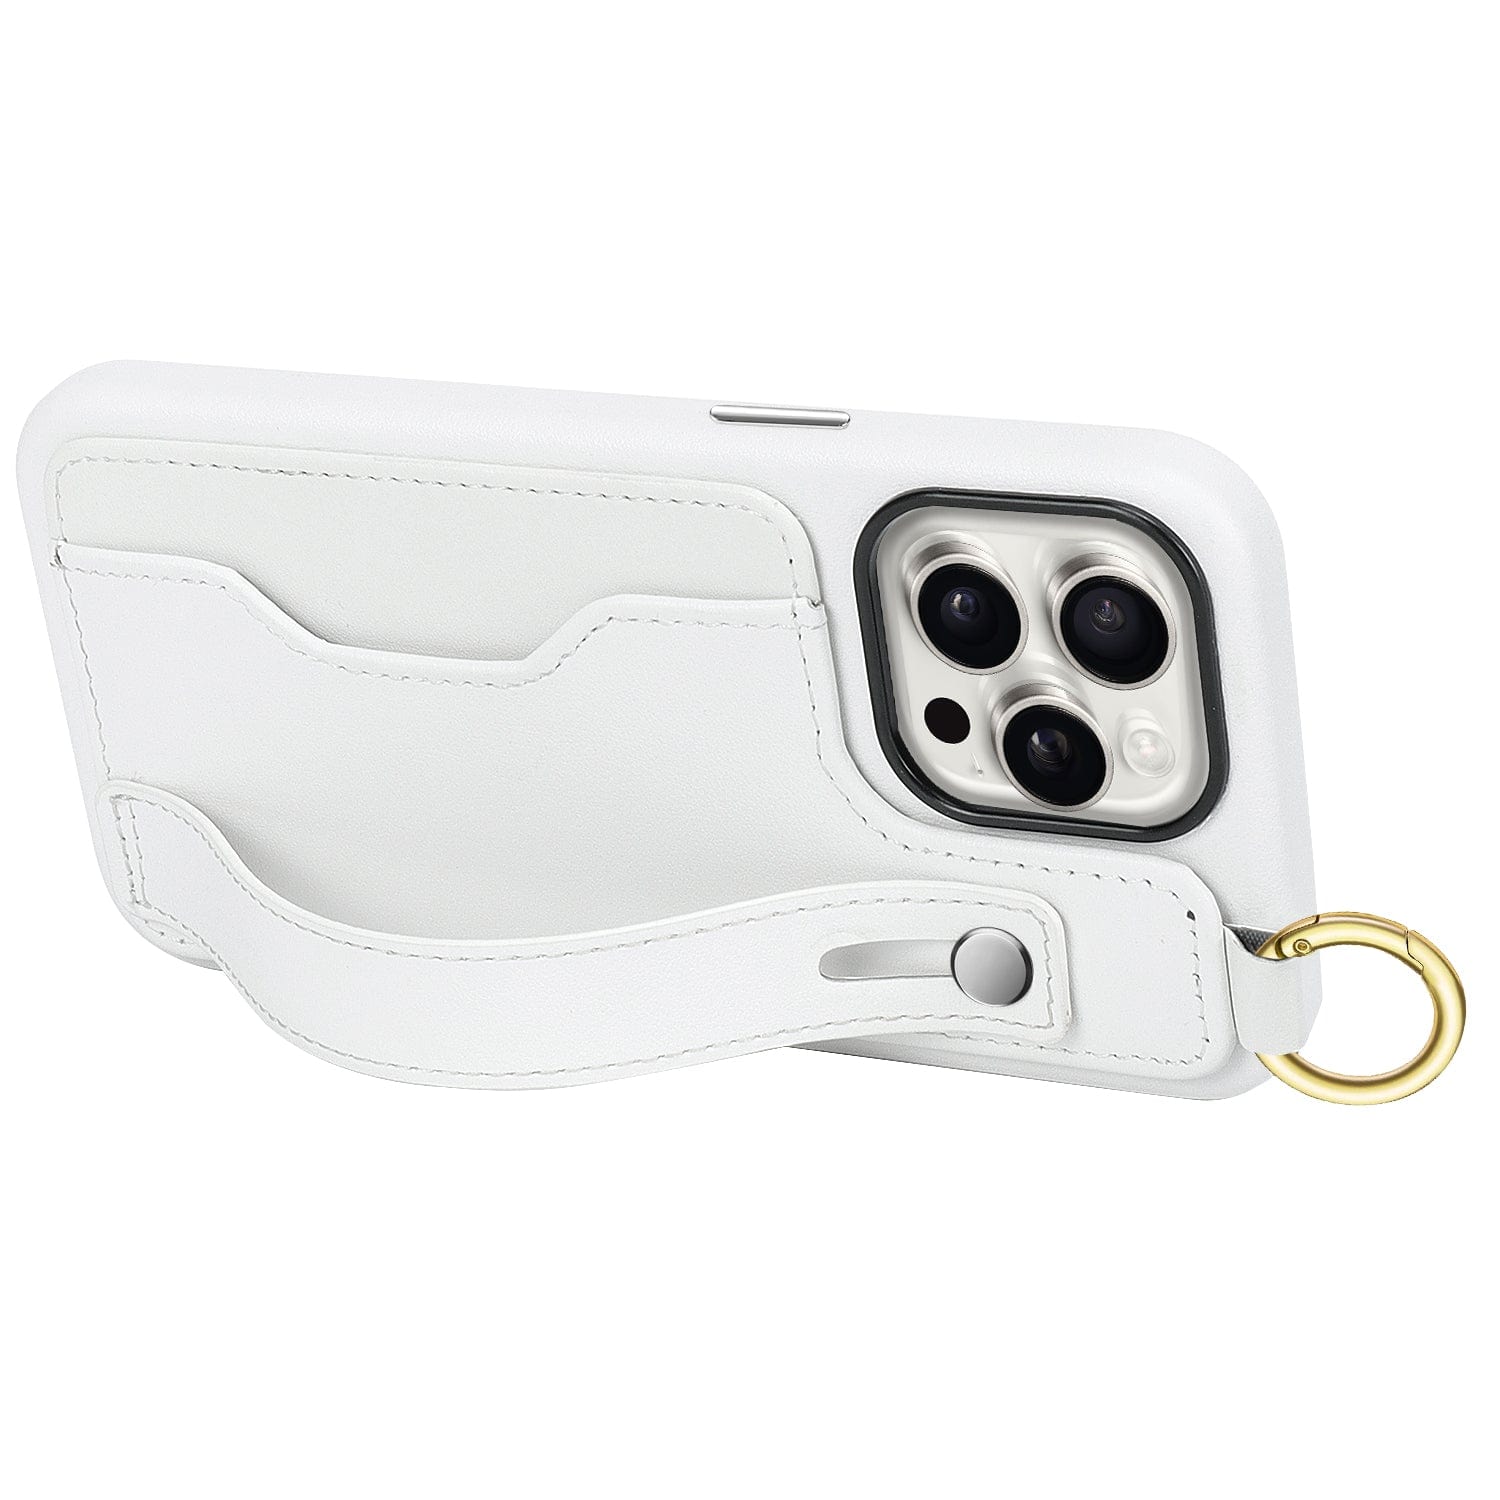 Genuine Leather FingerGrip Case with Card Slot for iPhone 15 Pro Max - White